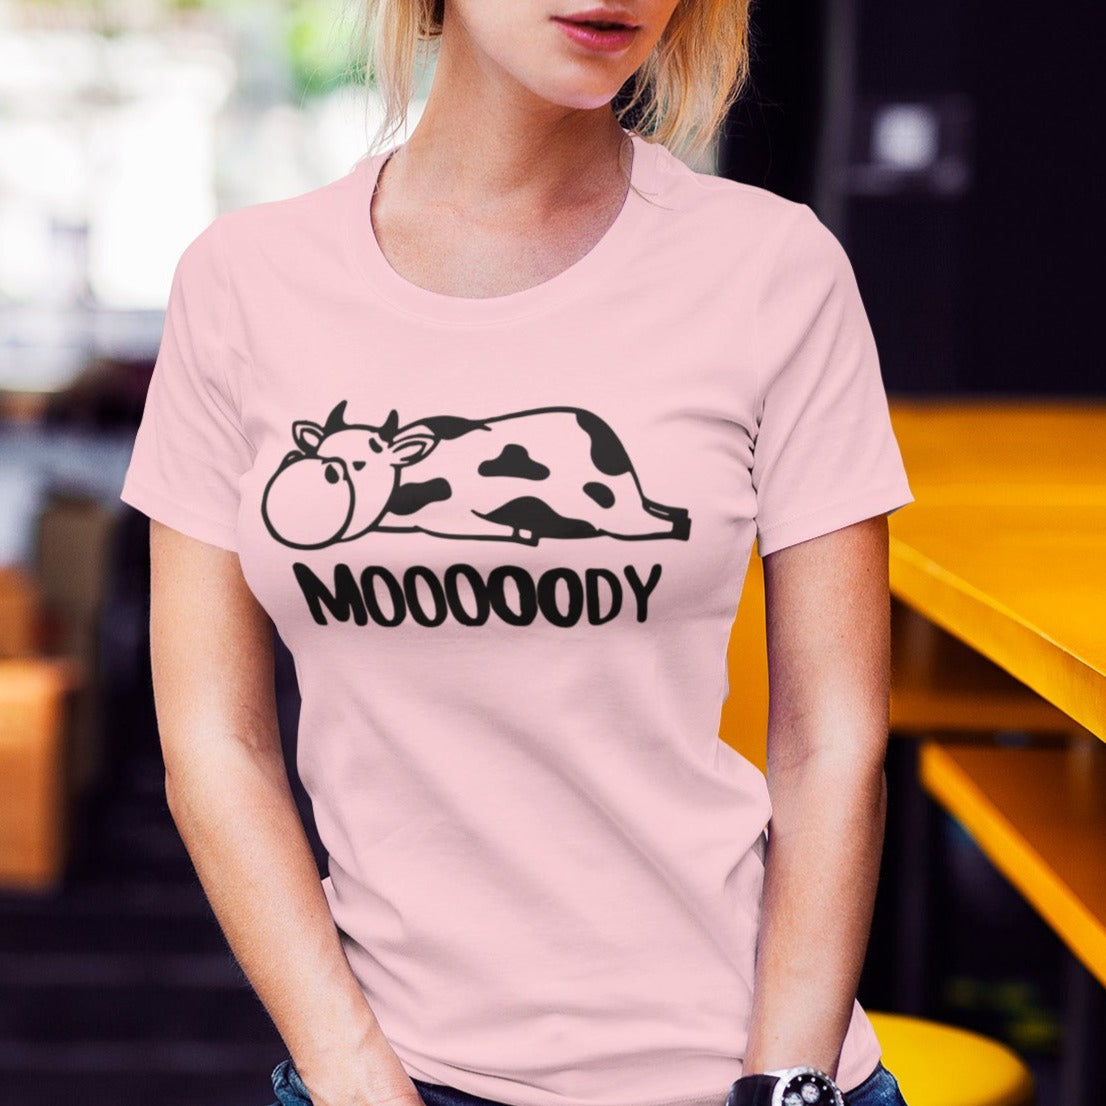 Mooooody-cow-farm-pink-t-shirt-funny-cropped-face-t-shirt-mockup-featuring-a-woman-sitting-on-a-stool